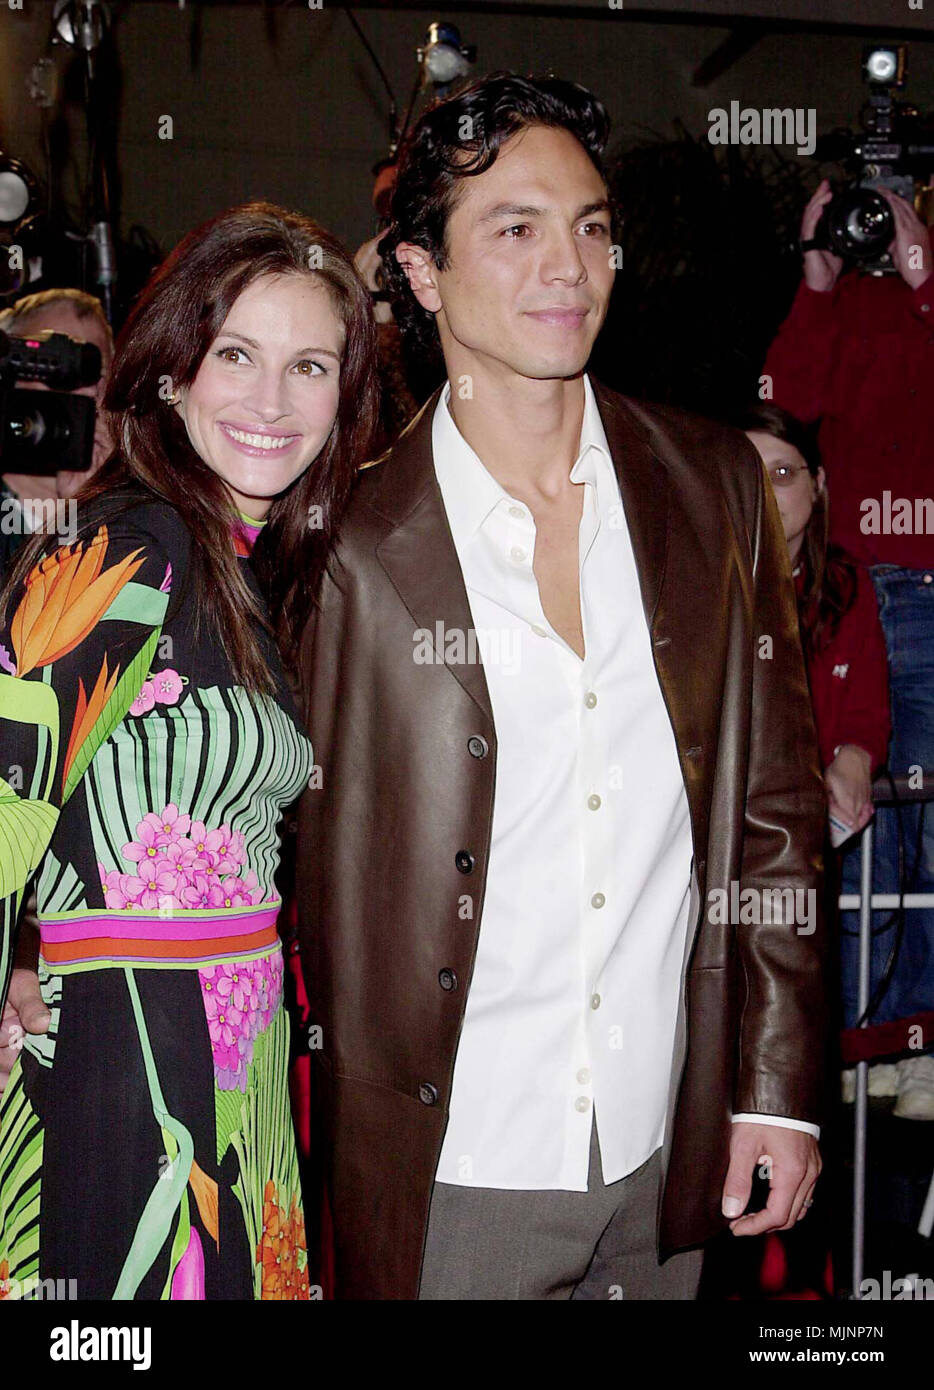 06 Nov 2000, Los Angeles, California, USA --- Original caption: Red Planet premiere was held at the Westwood Village Theatre in Los Angeles. --- ' Tsuni / Bourquard 'Julia Roberts and Benjamin Bratt   Julia Roberts and Benjamin Bratt   Julia Roberts and Benjamin Bratt   Event in Hollywood Life - California,  Red Carpet Event, Vertical, USA, Film Industry, Celebrities,  Photography, Bestof, Arts Culture and Entertainment, Topix  Celebrities fashion /  from the Red Carpet-1994-2000, one person, Vertical, Best of, Hollywood Life, Event in Hollywood Life - California,  Red Carpet and backstage, US Stock Photo